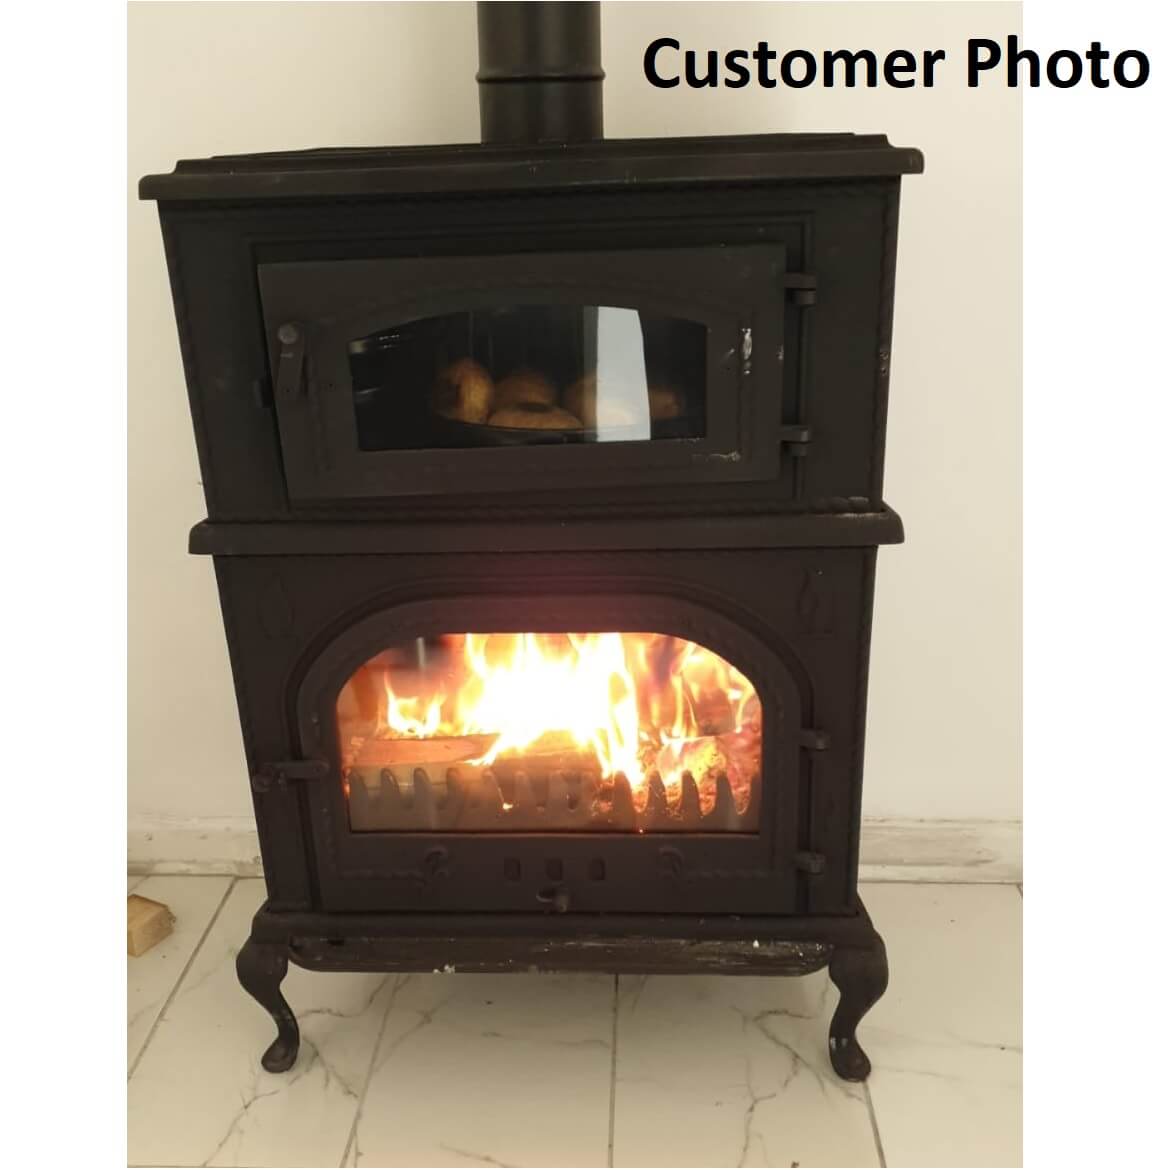 Cooking Wood Burning Stove Oven Cooker Fireplace 140kg Cast Iron Body